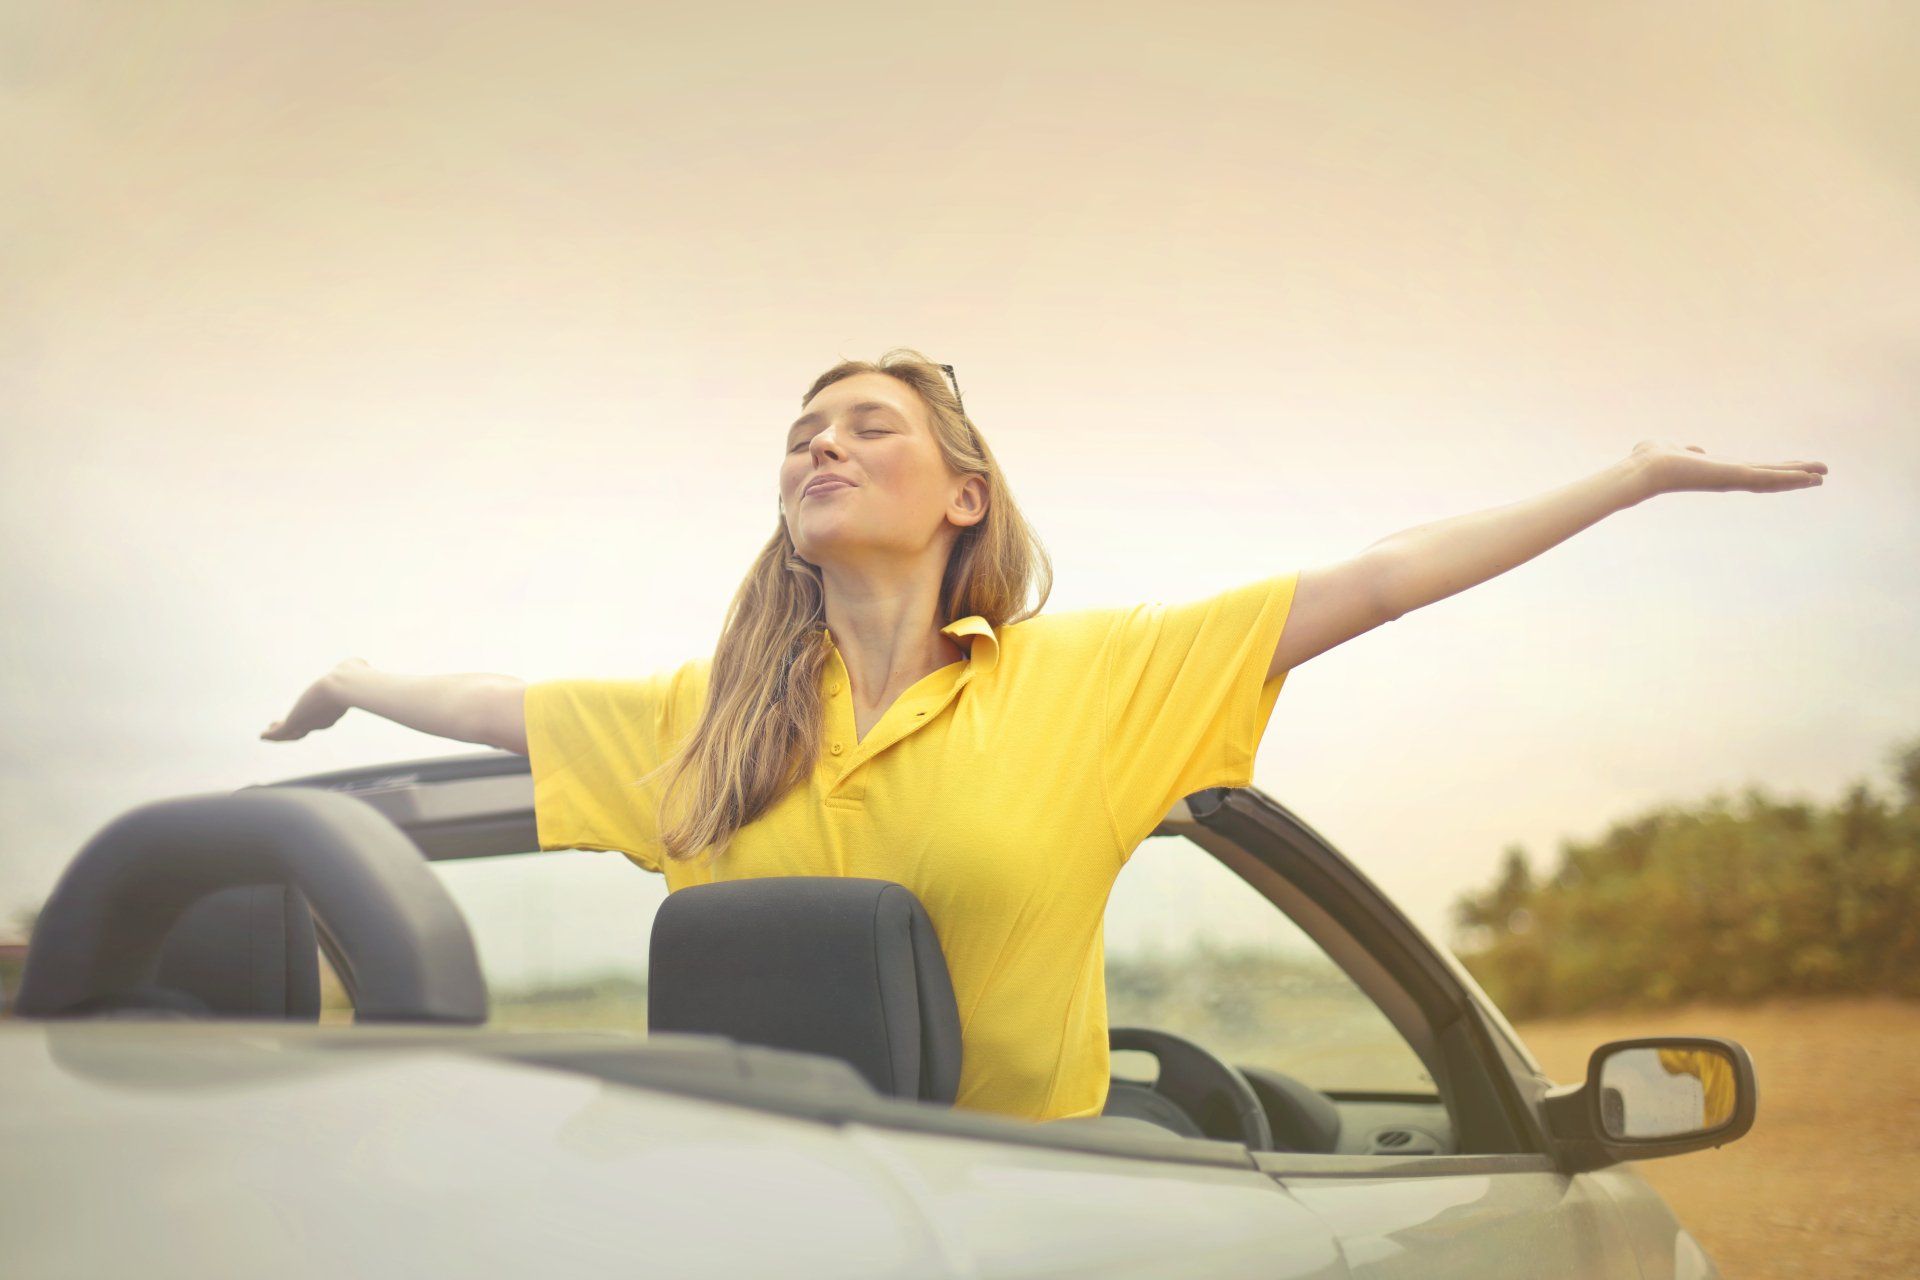 A woman in a yellow shirt is sitting in a convertible car with her arms outstretched.